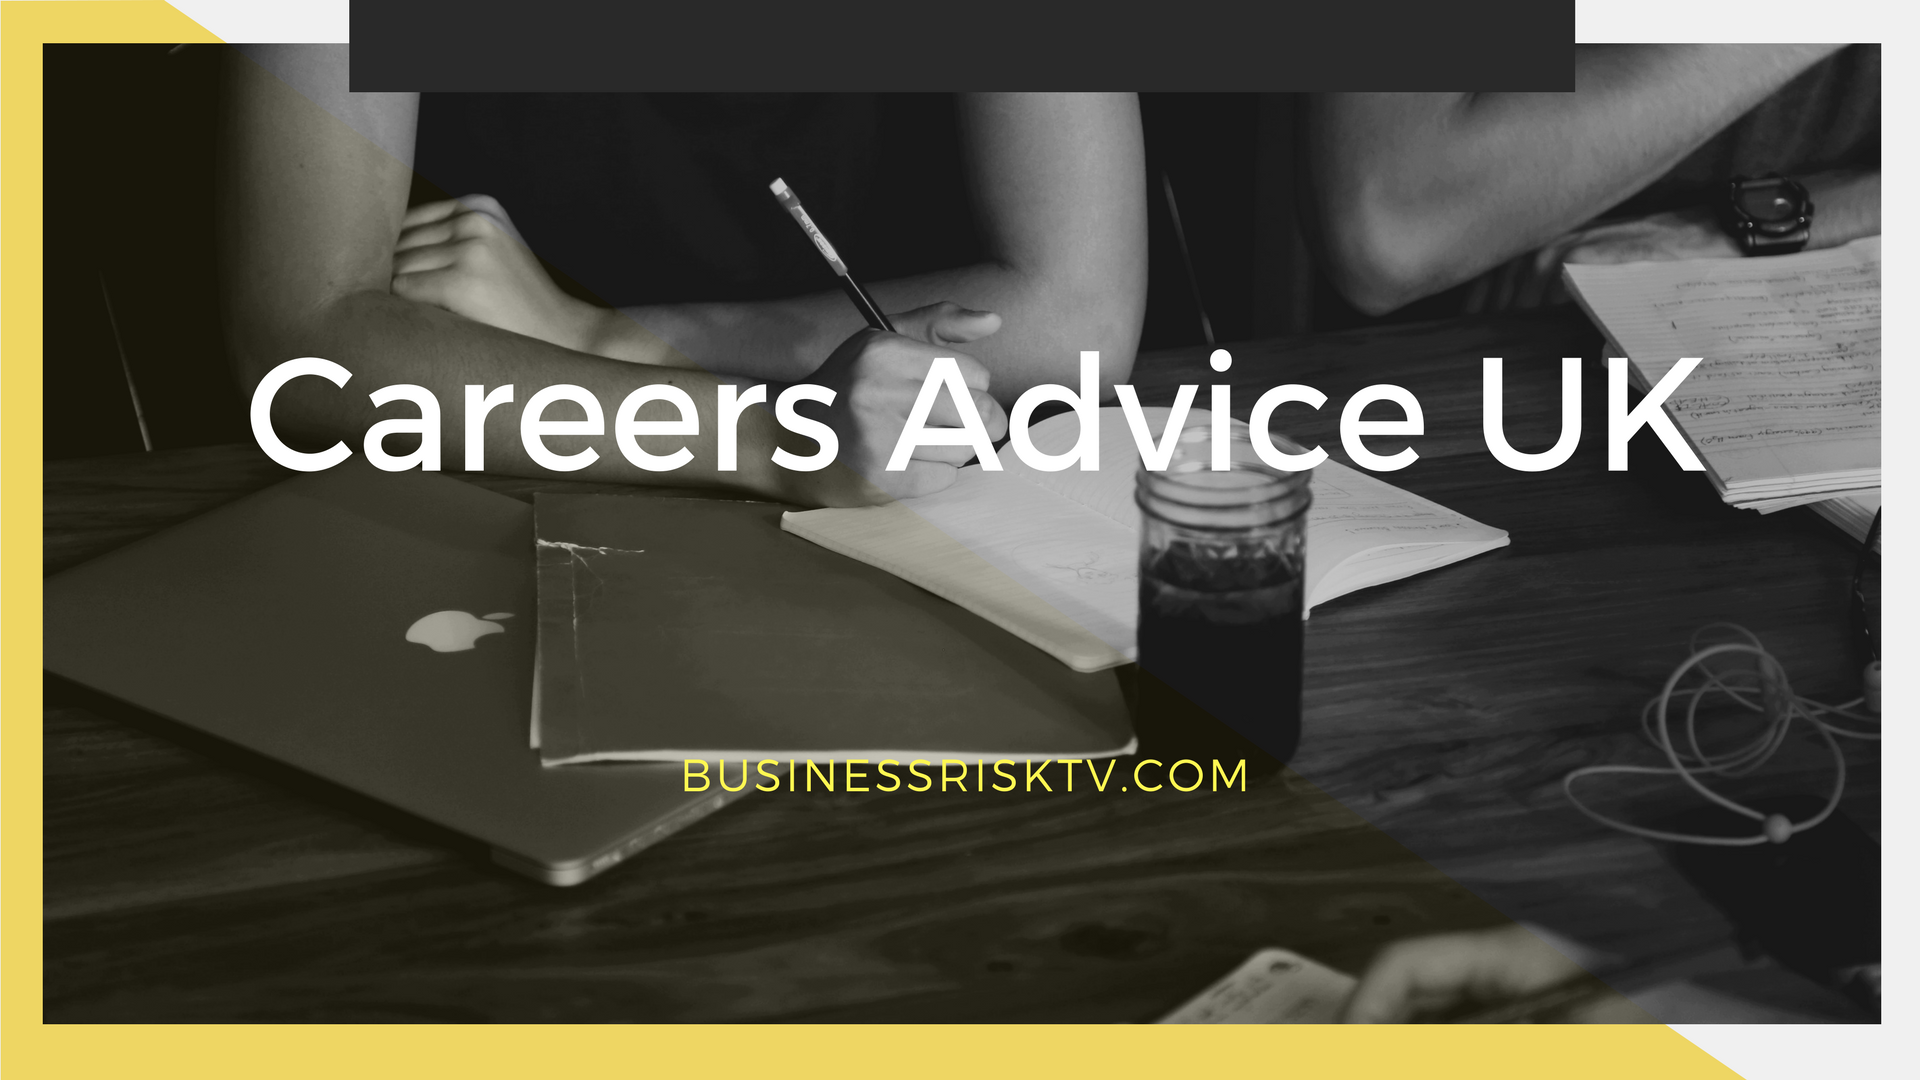 Where to get careers advice in UK for adults